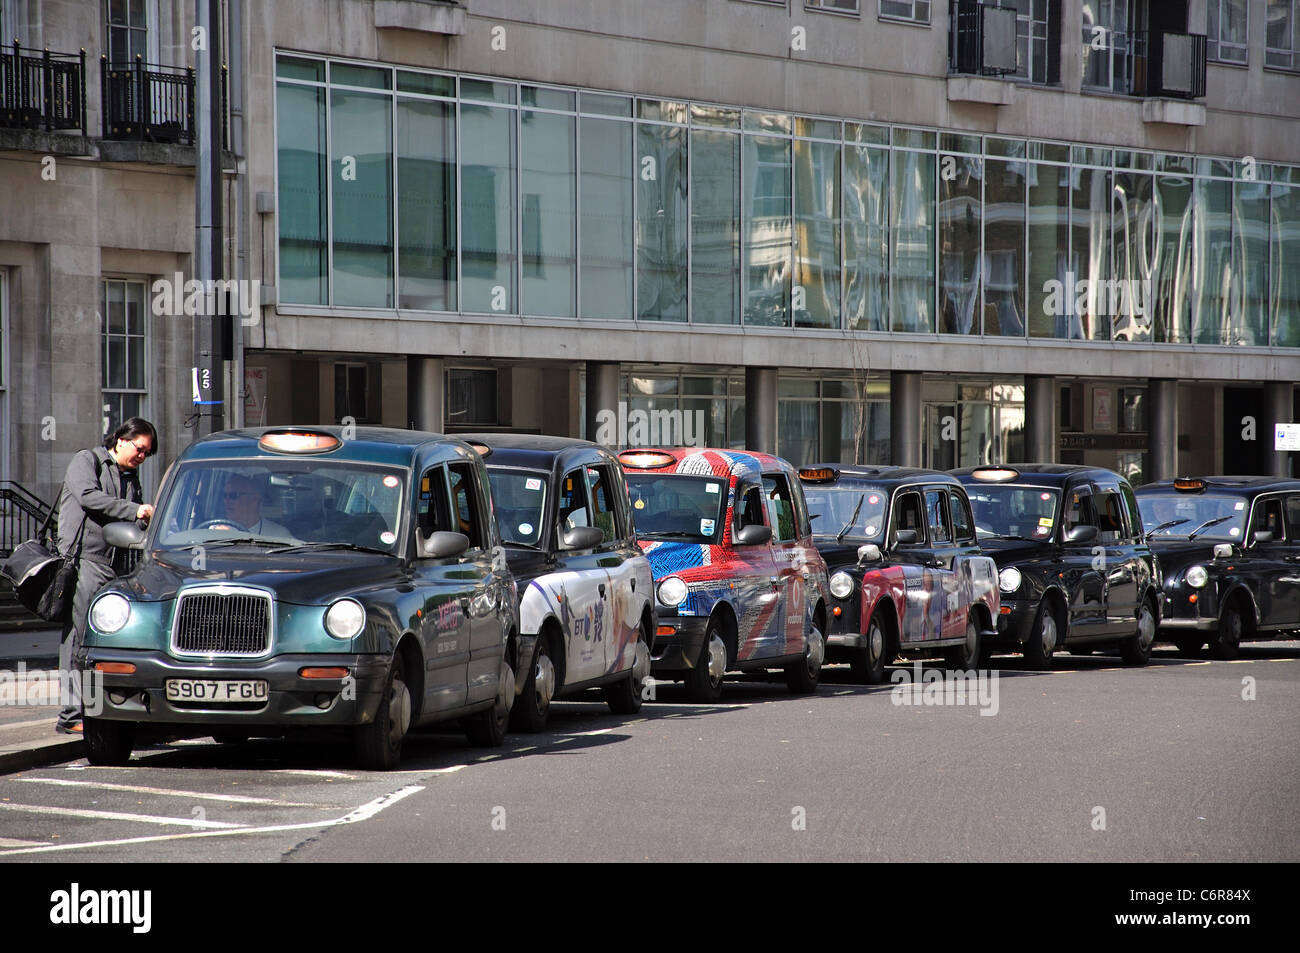 Taxi, Portland Place, Regent Street, City of Westminster, Greater London, England, Regno Unito Foto Stock